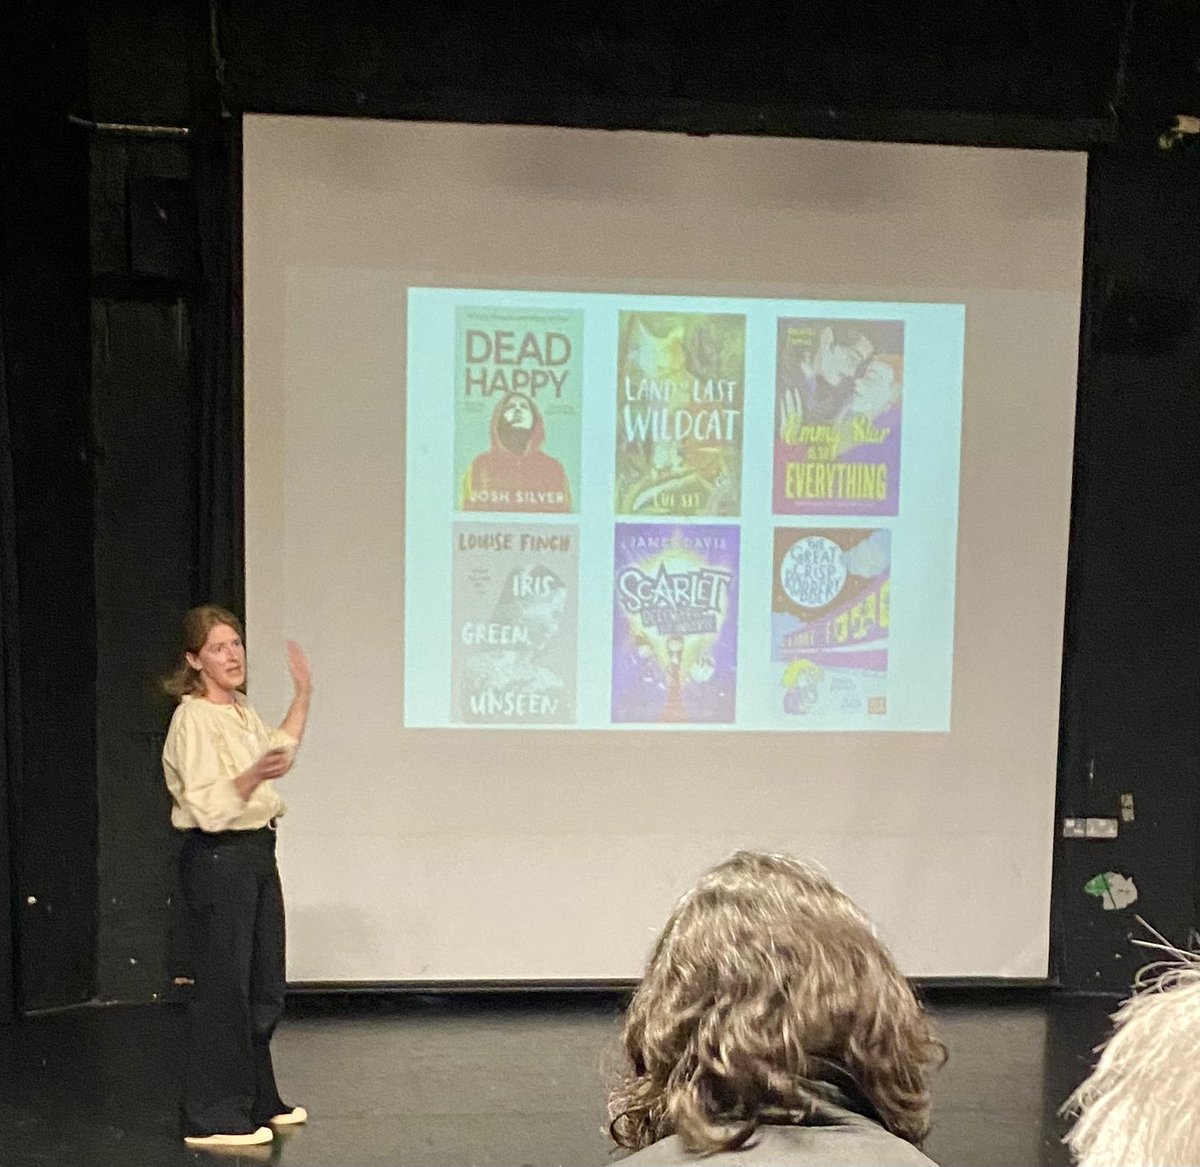 A great evening at @HWSoC last night. I enjoyed giving my first ever public talk about my new book Women of War, and Becky Bagnell’s agent talk was fascinating. Well done to all the winners of this month’s writing competition ✍️👍 #writing #writingcommunity